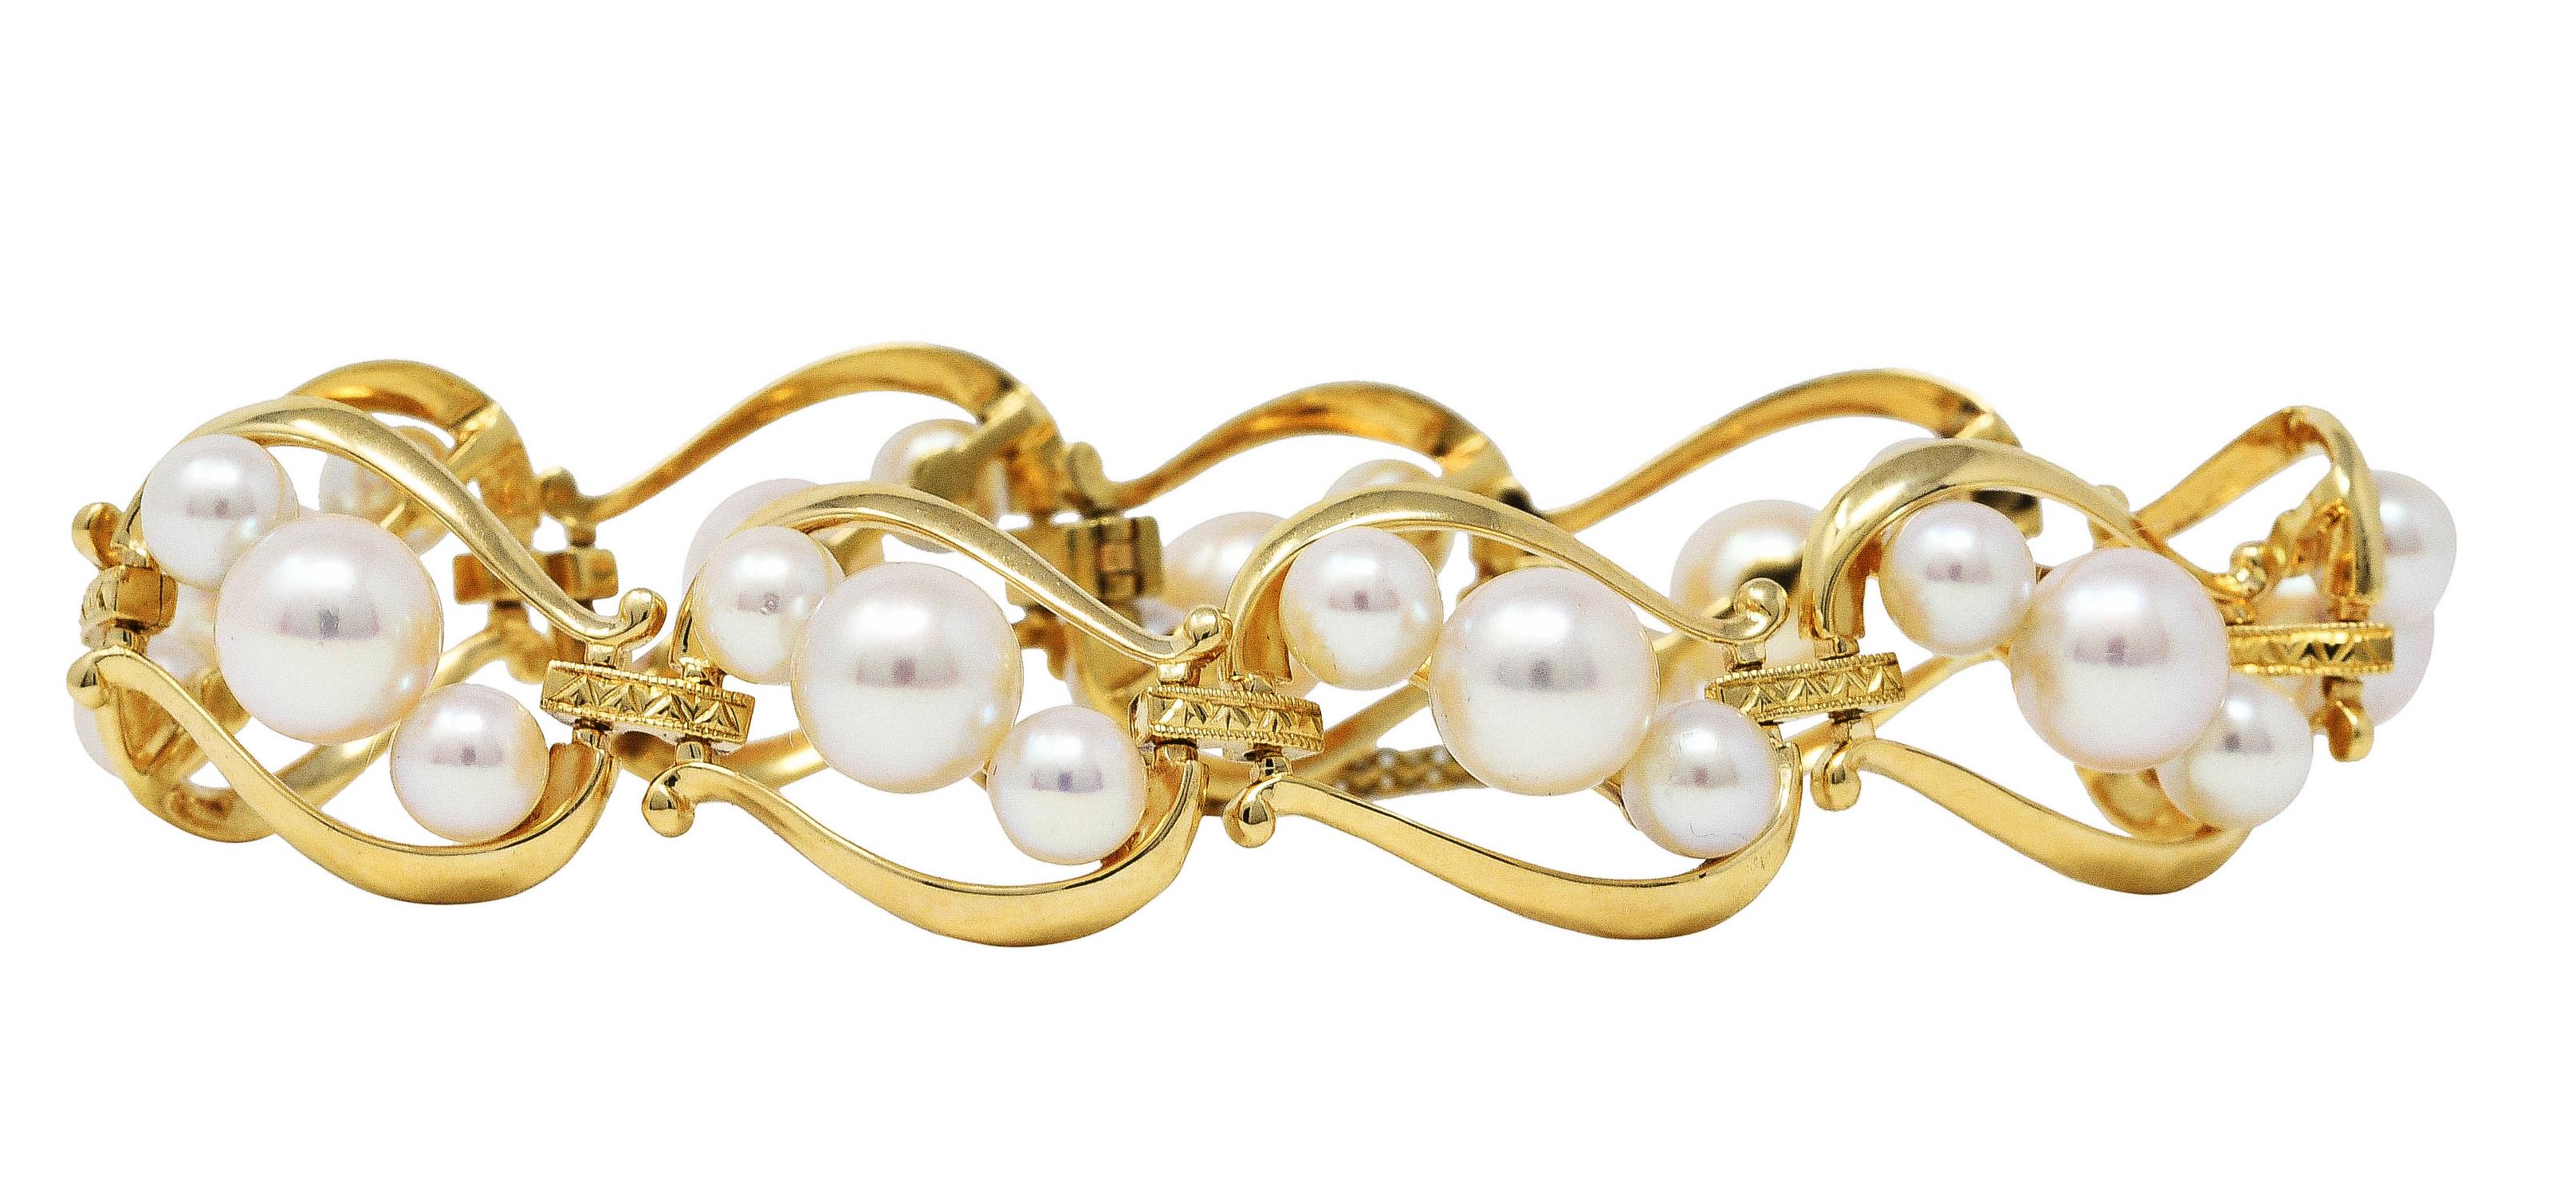 Bracelet is designed as scrolling articulated links

Alternating with bar spacer links - chevron engraved

Each link features three cultured pearls ranging in size from 7.3 mm to 5.2 mm

Pearls are cream in body color with strong rosè overtones and